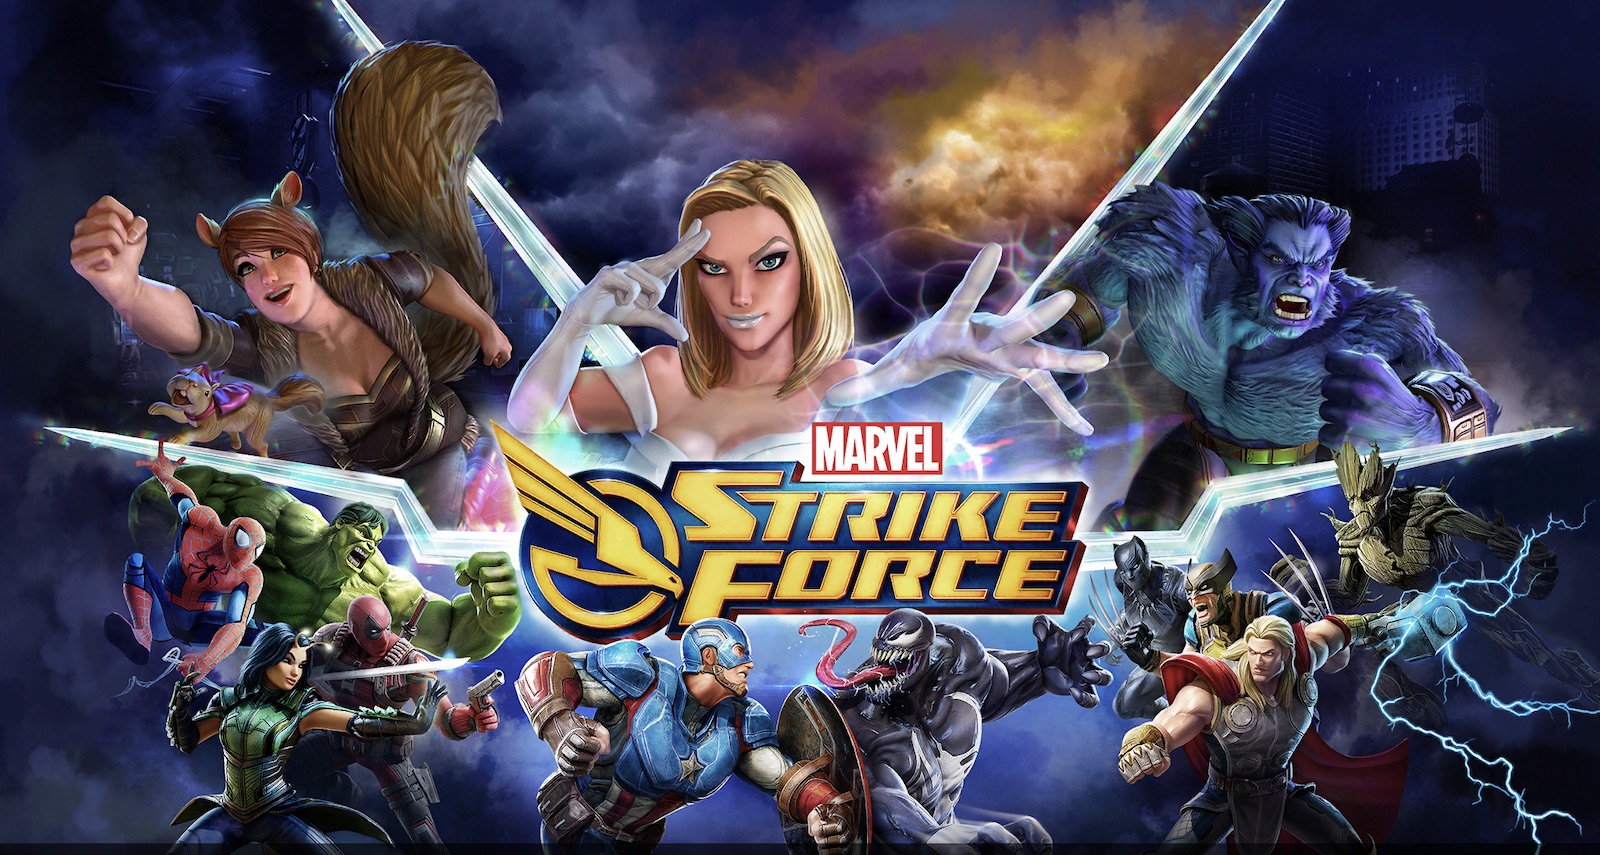 How dare you call us “agents” : r/MarvelStrikeForce